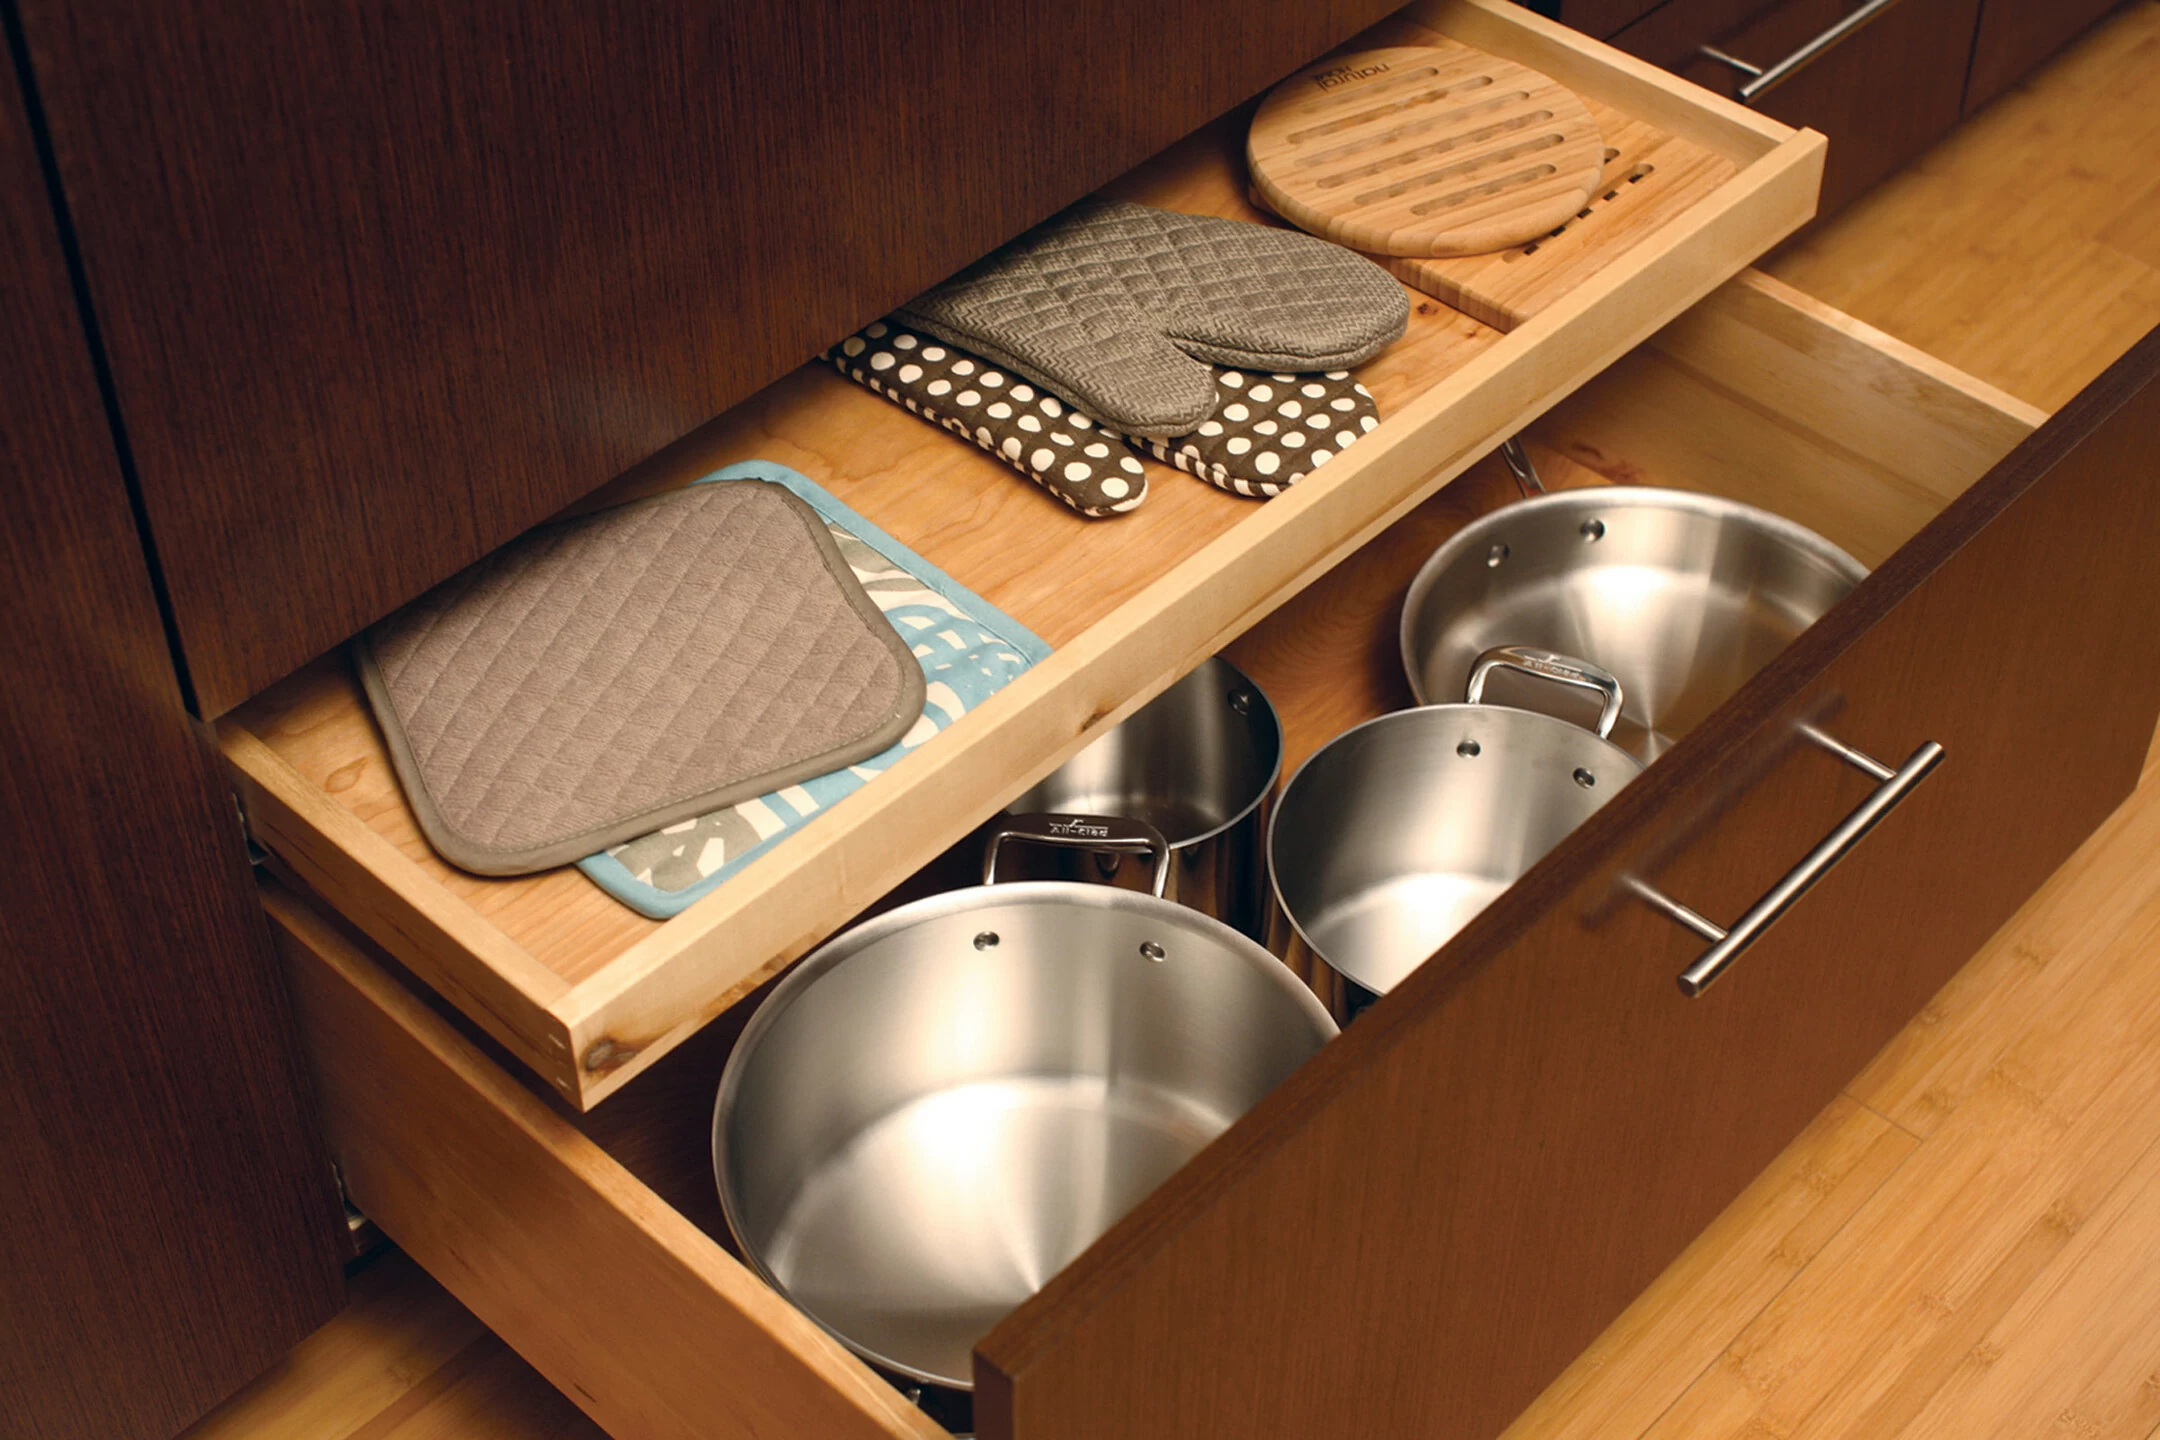 Roll-out Shallow Above Drawer Storage